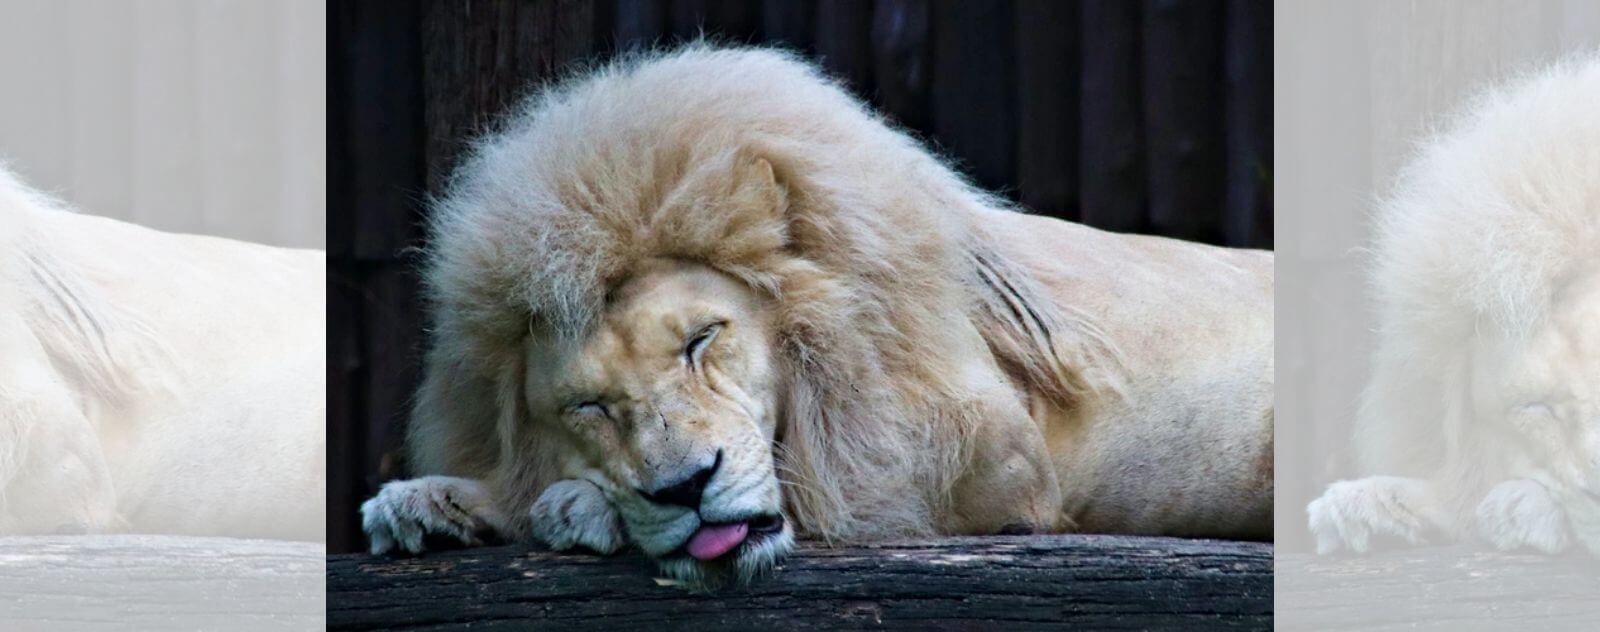 Sleeping White Lion Sticking Its Tongue Out